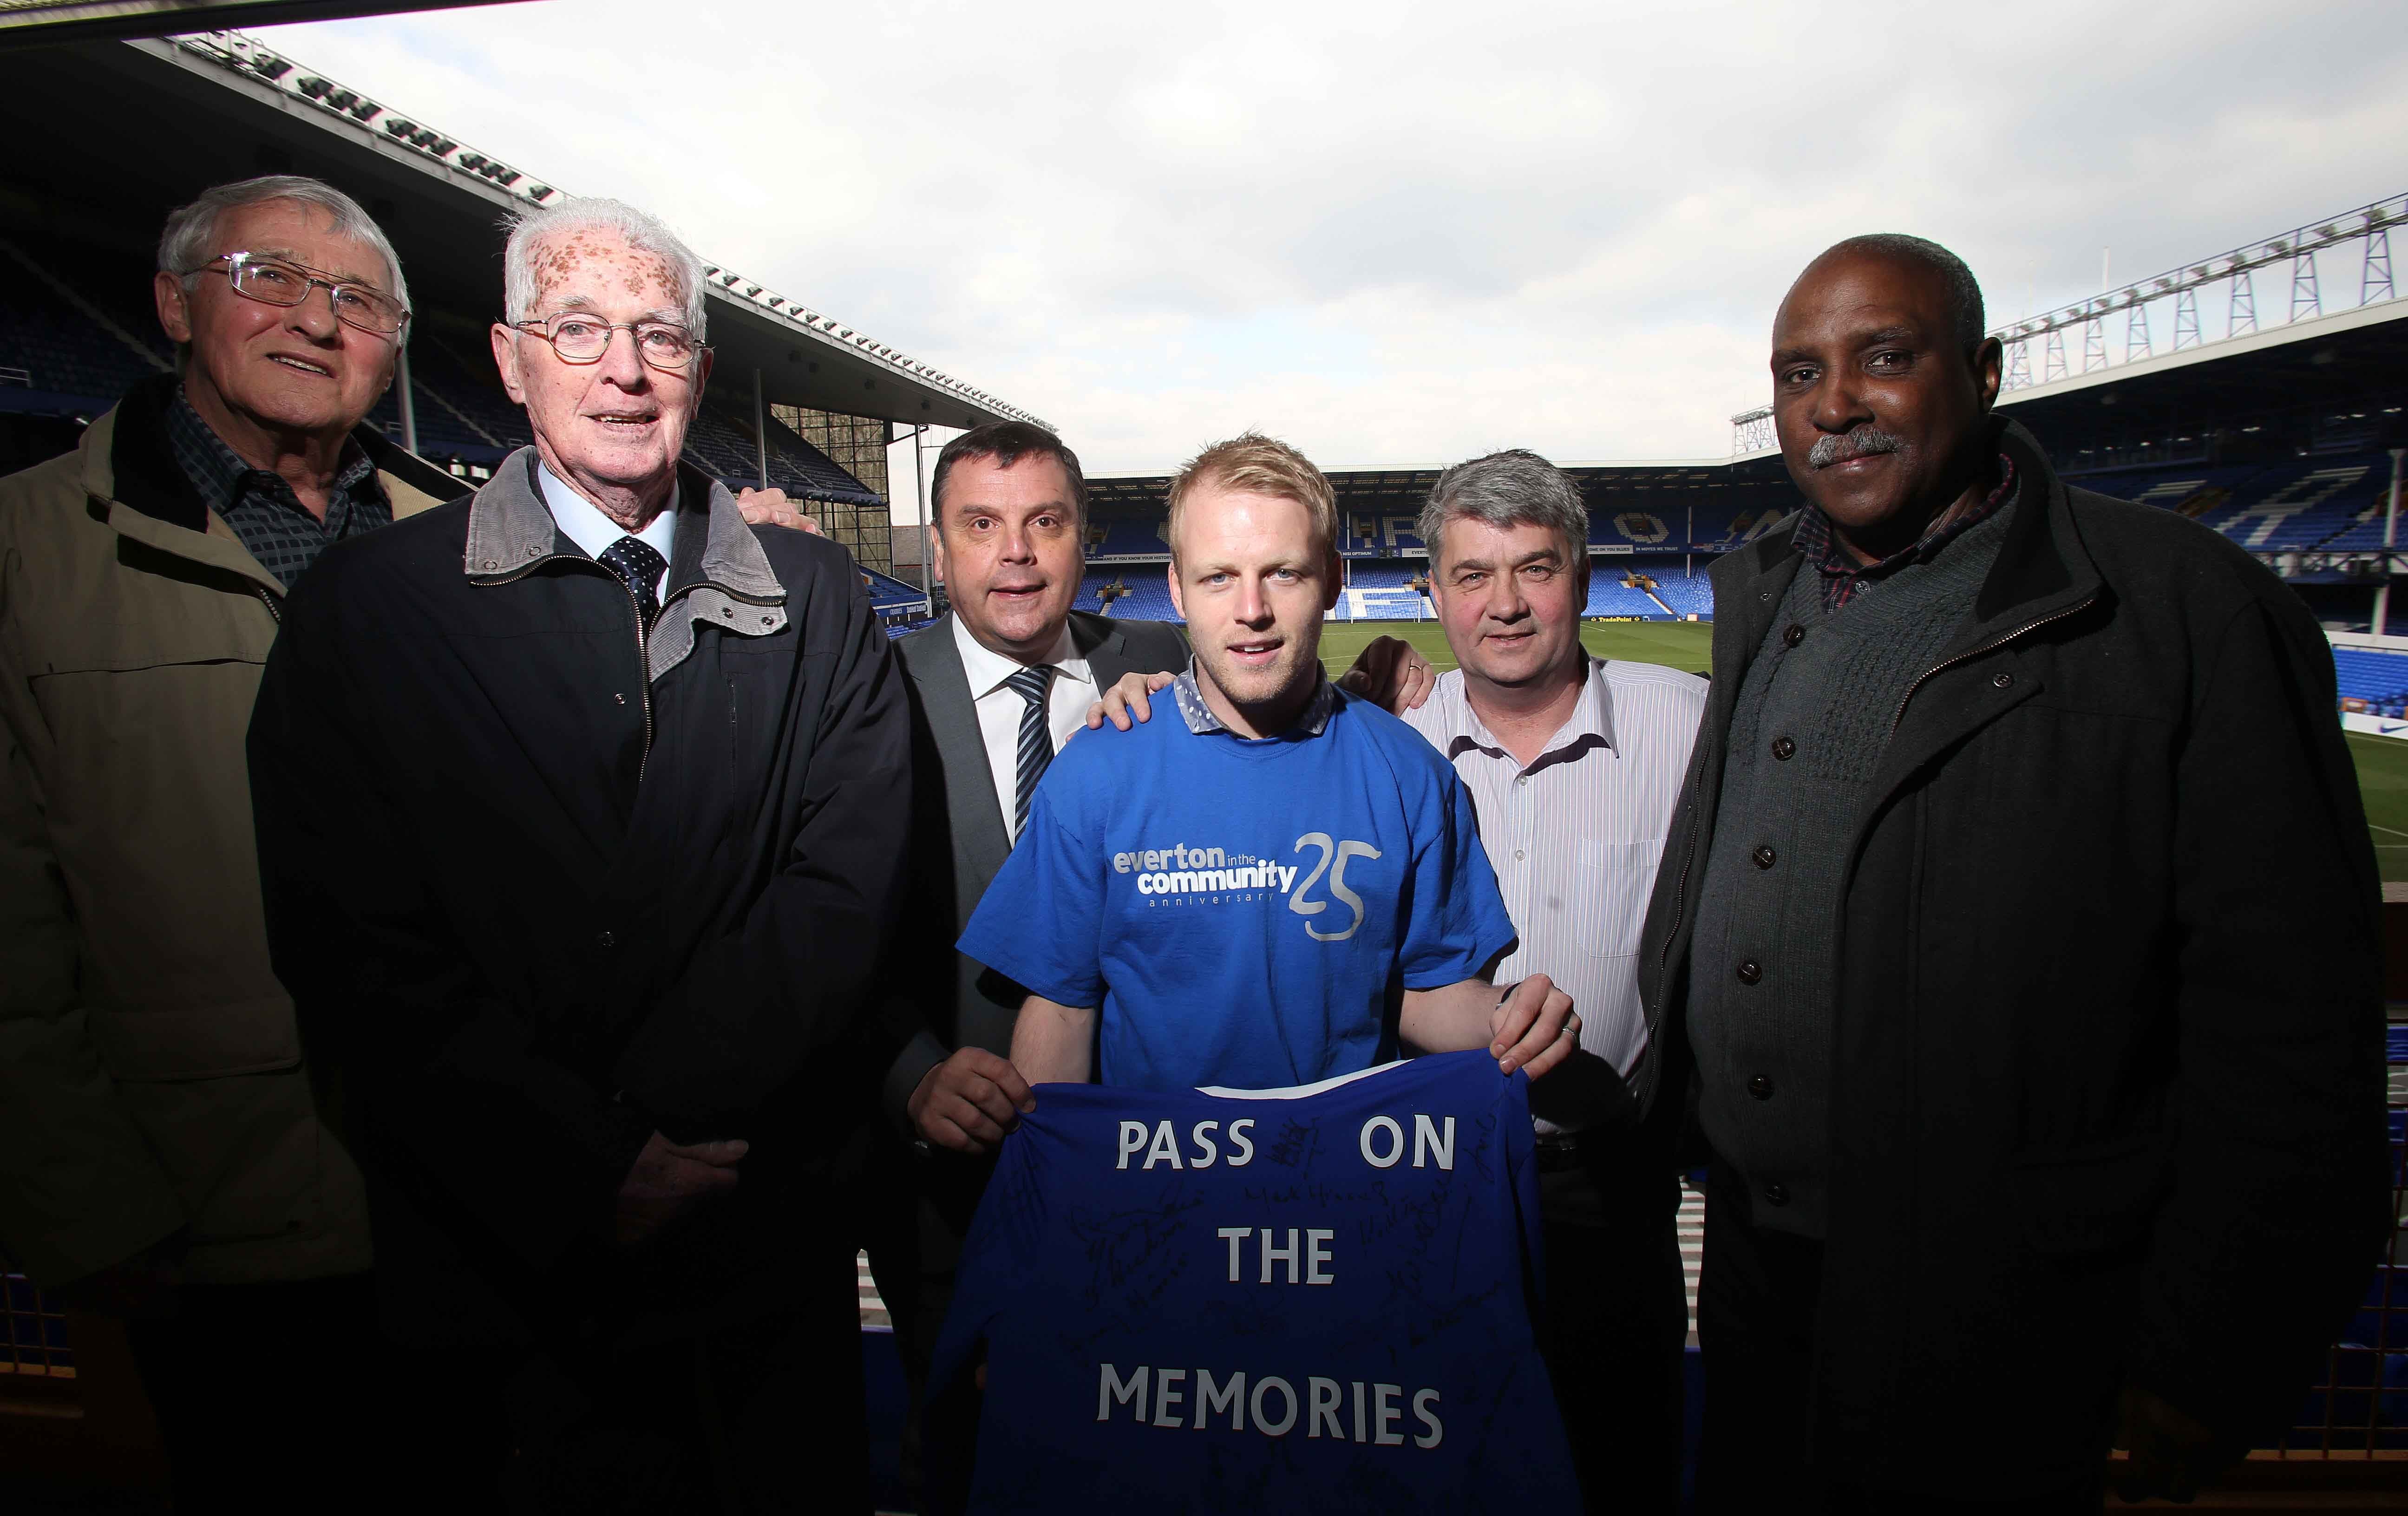 An Everton in the Community project designed to support those living with Dementia through weekly reminiscence sessions, day trips and social activities.